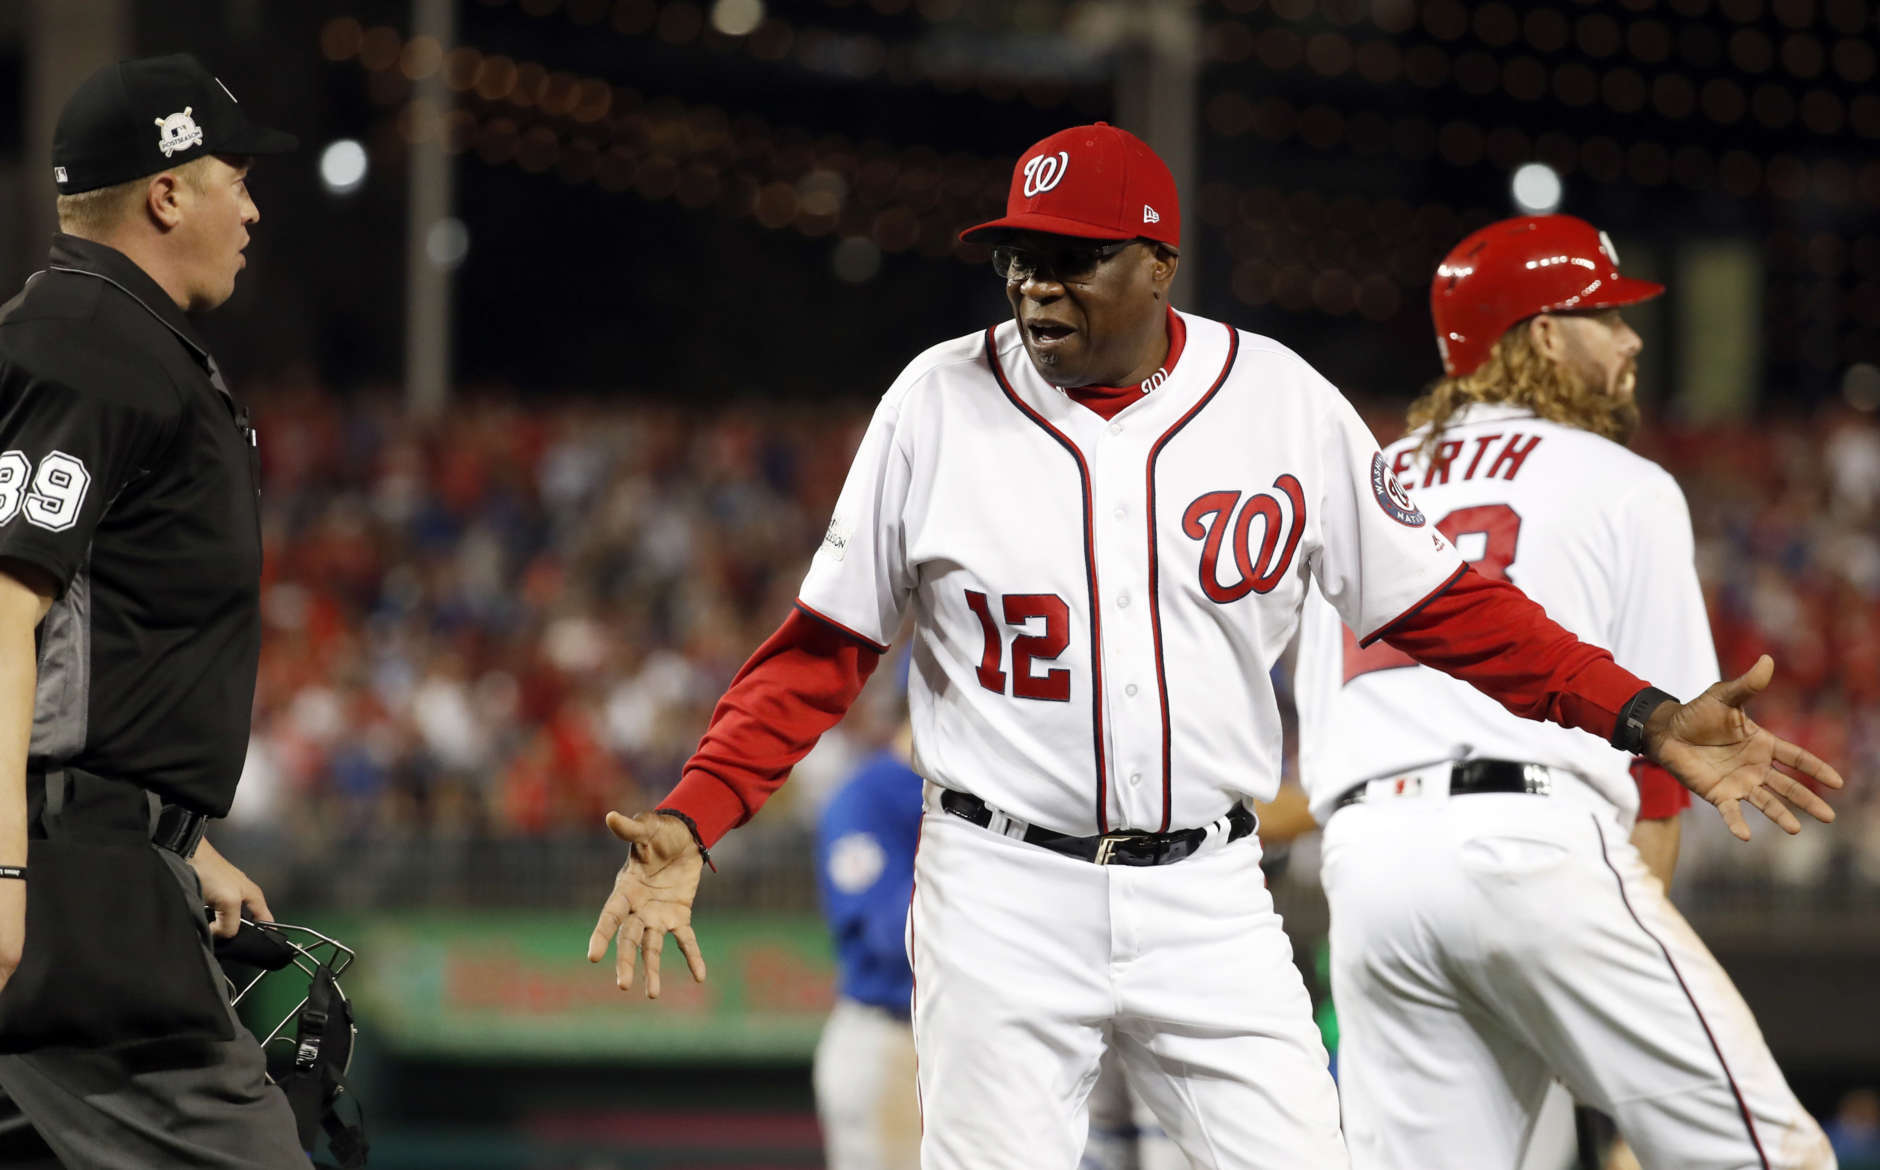 Dusty Baker leads fifth different club to division title